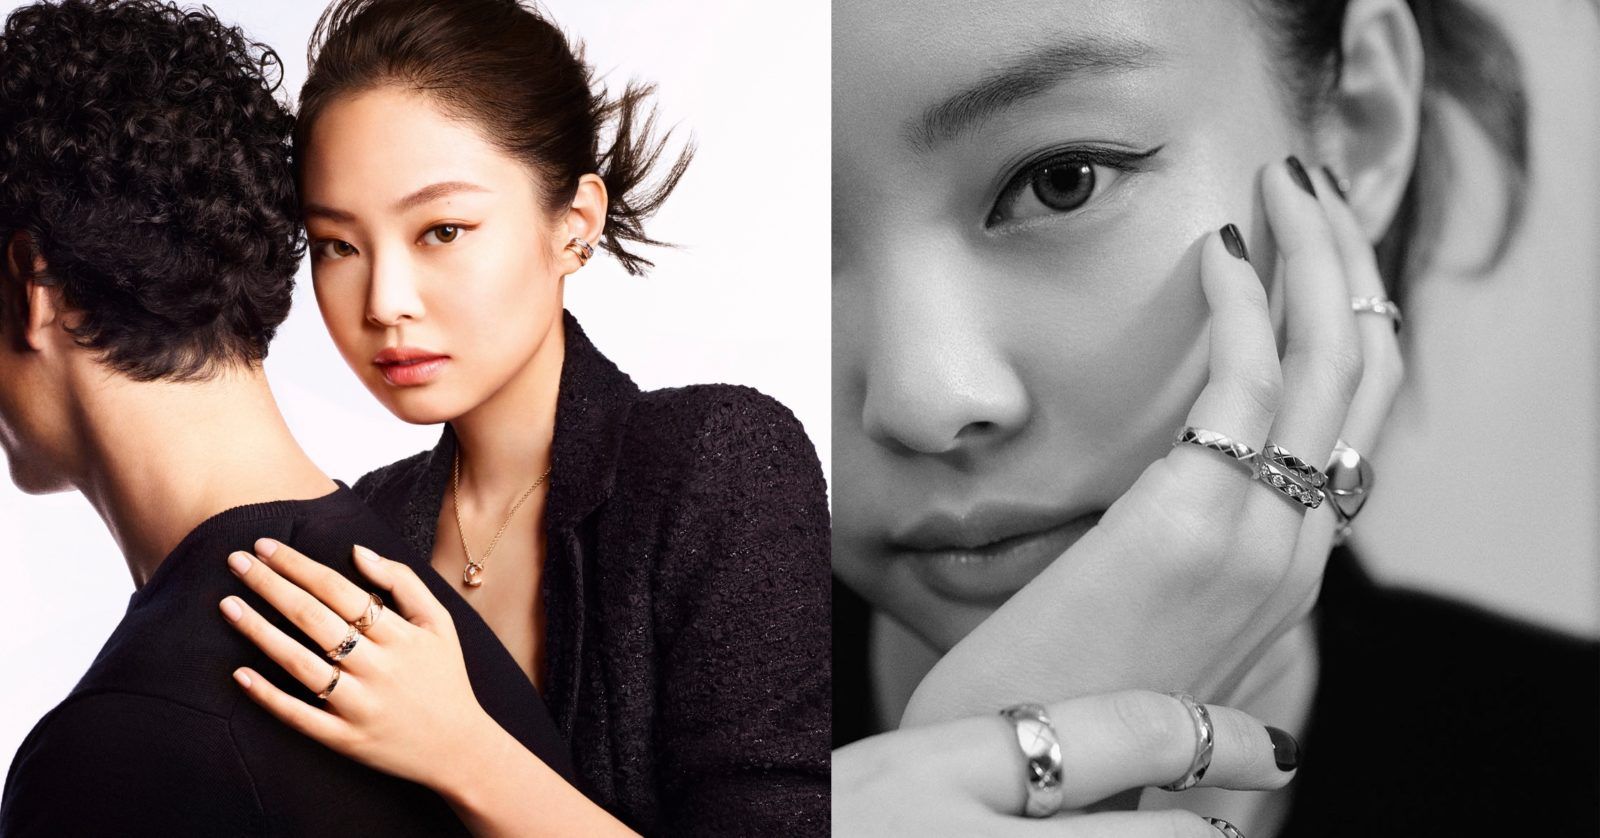 Blackpink’s Jennie reveals the new Chanel Coco Crush jewellery collection